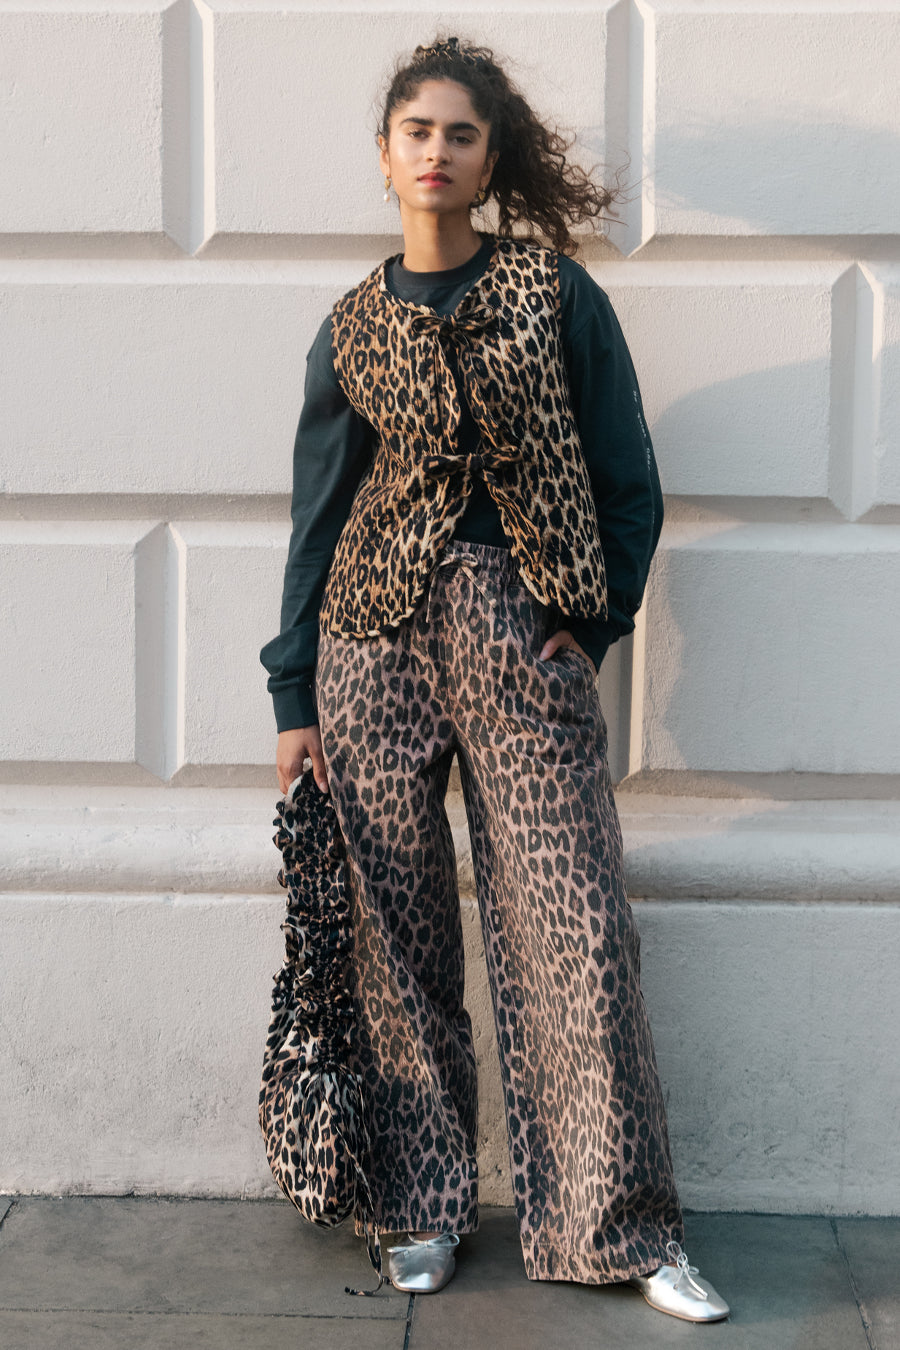 The Damson Madder leopard print rafe pants are our wide leg leopard denim trouser with an adjustable tie waist.

